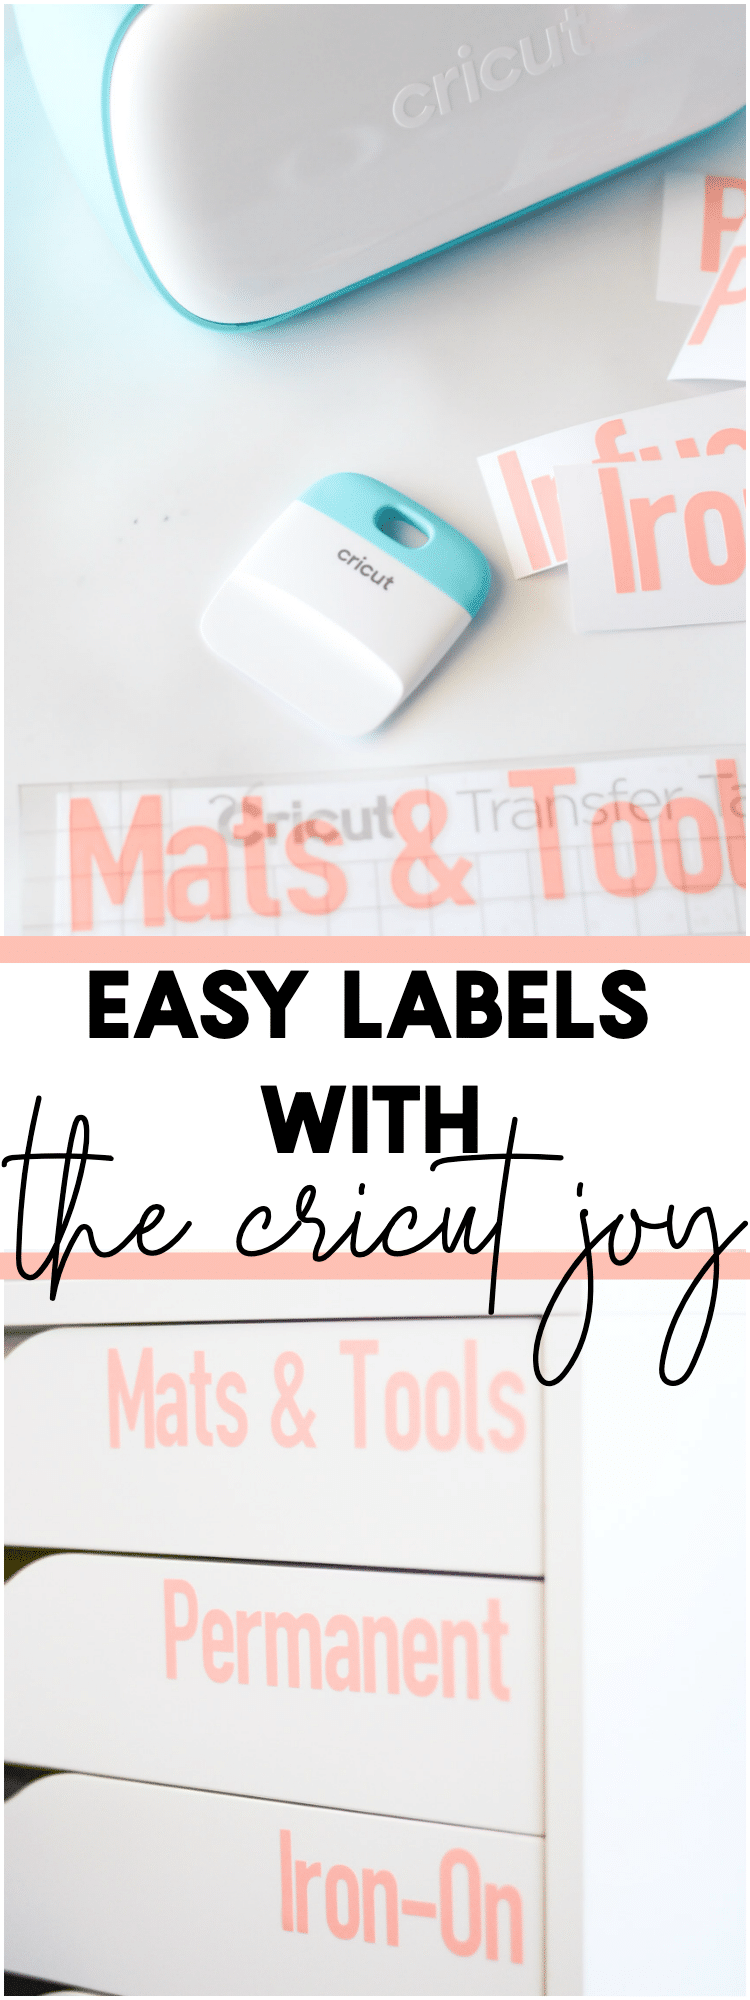 easy-labels-with-cricut-joy-three-little-ferns-family-lifestyle-blog